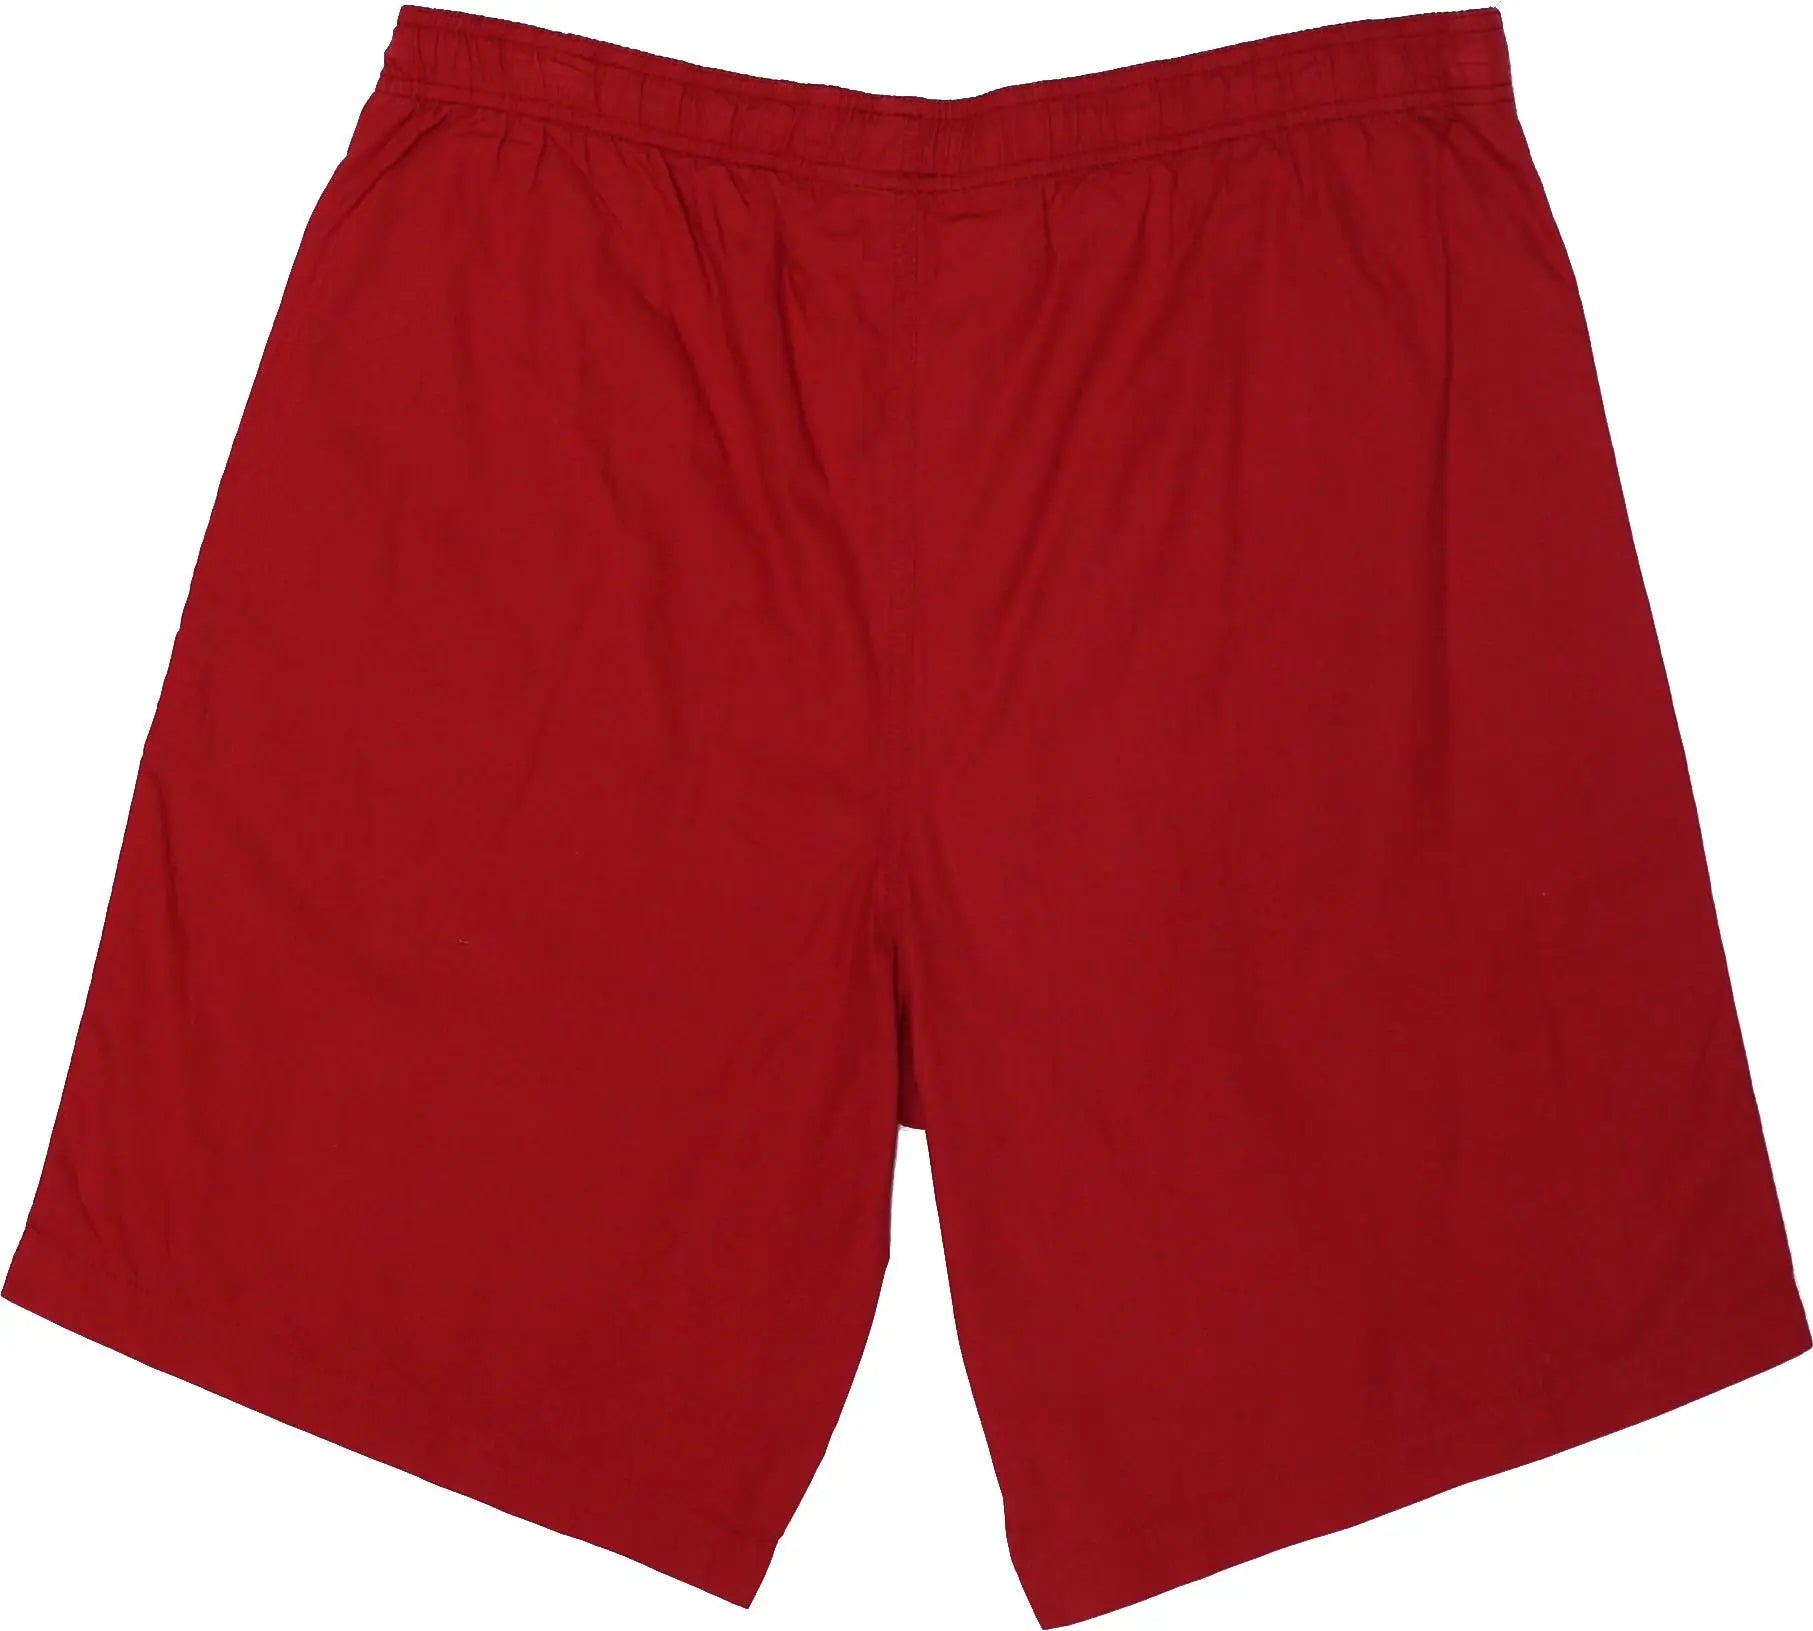 Moschino - Red Swim Trunks by Moschino Mare- ThriftTale.com - Vintage and second handclothing